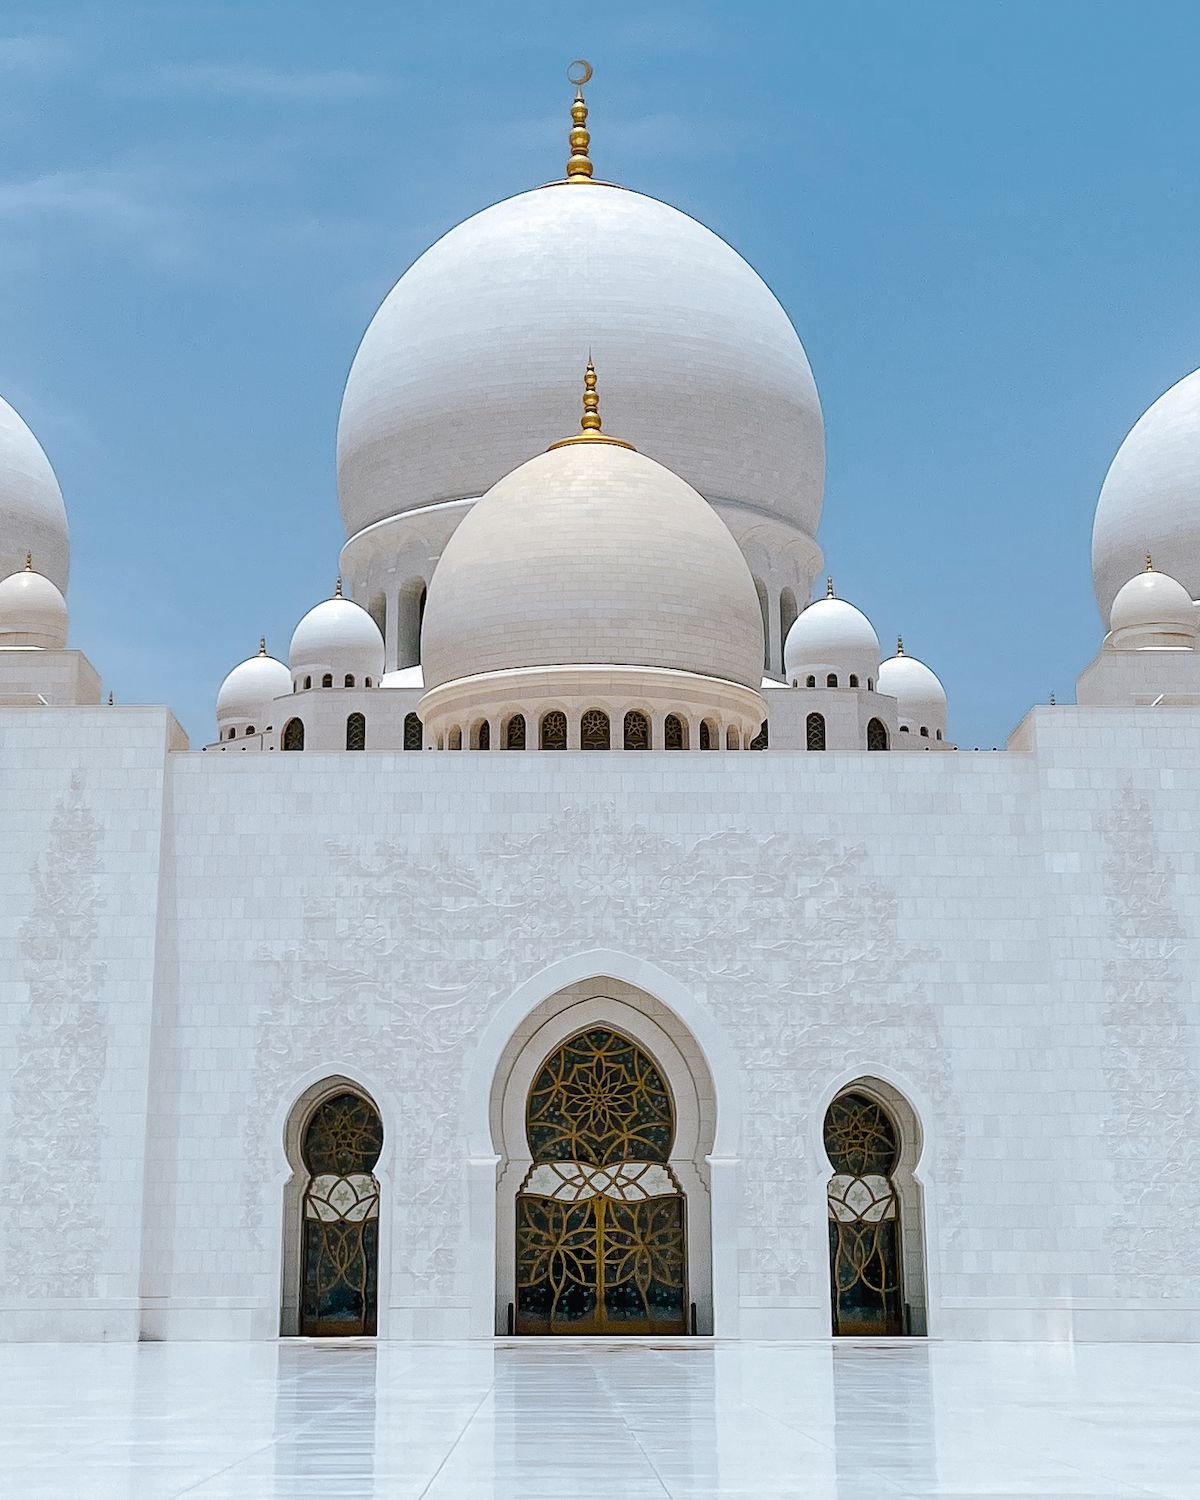 Stark white domes of the Sheikh Zayed Grand Mosque